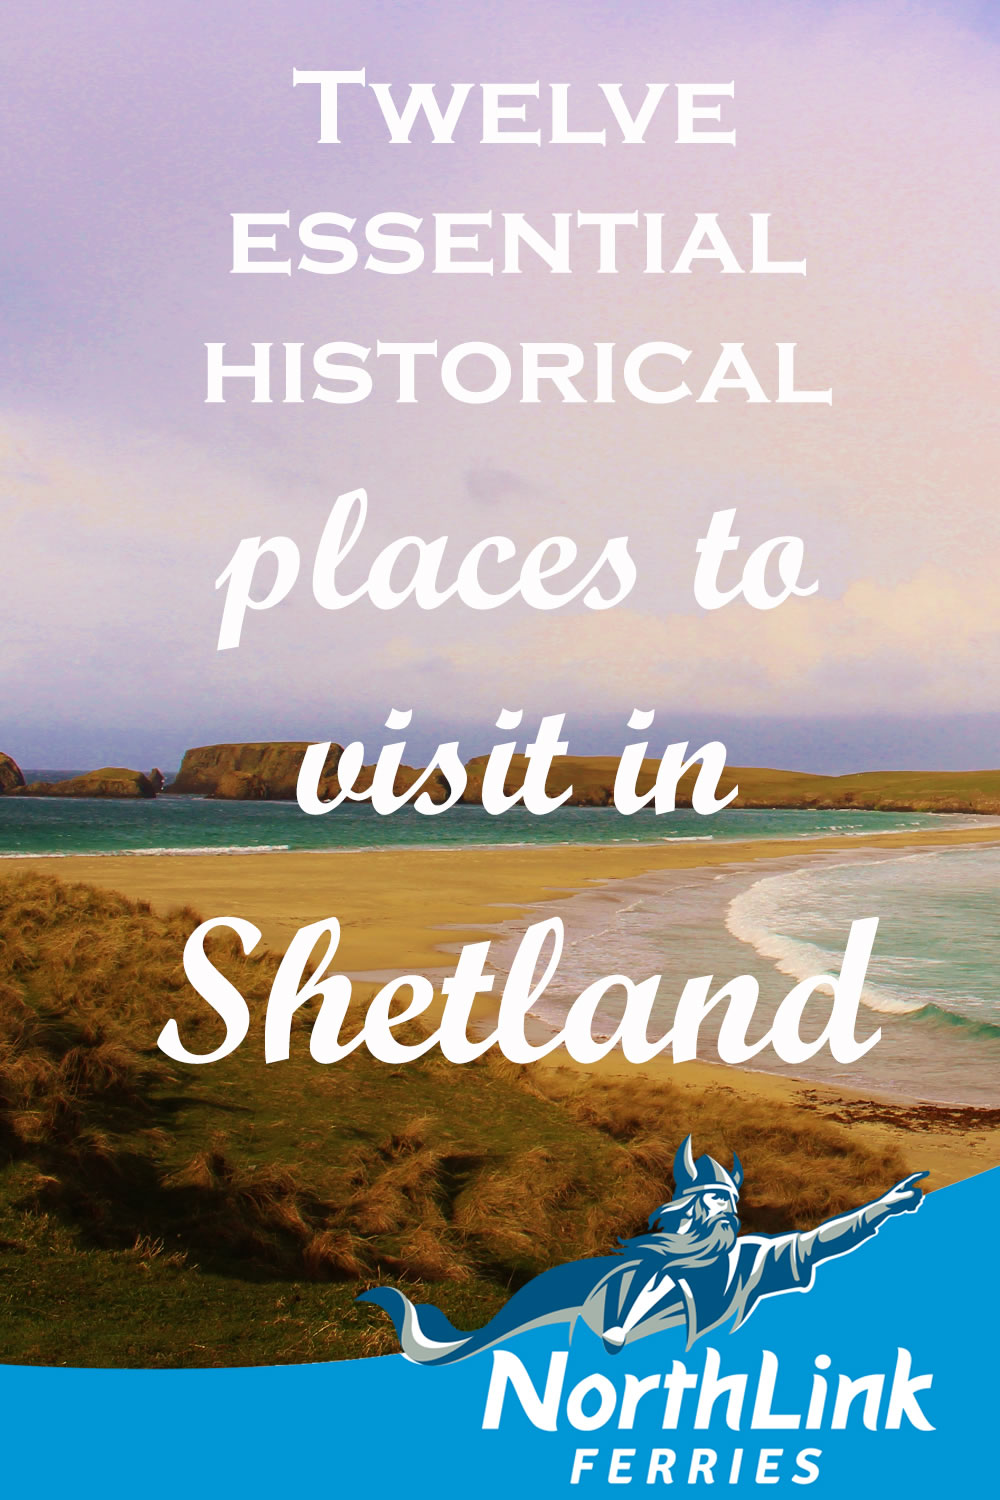 Twelve essential historical places to visit in Shetland